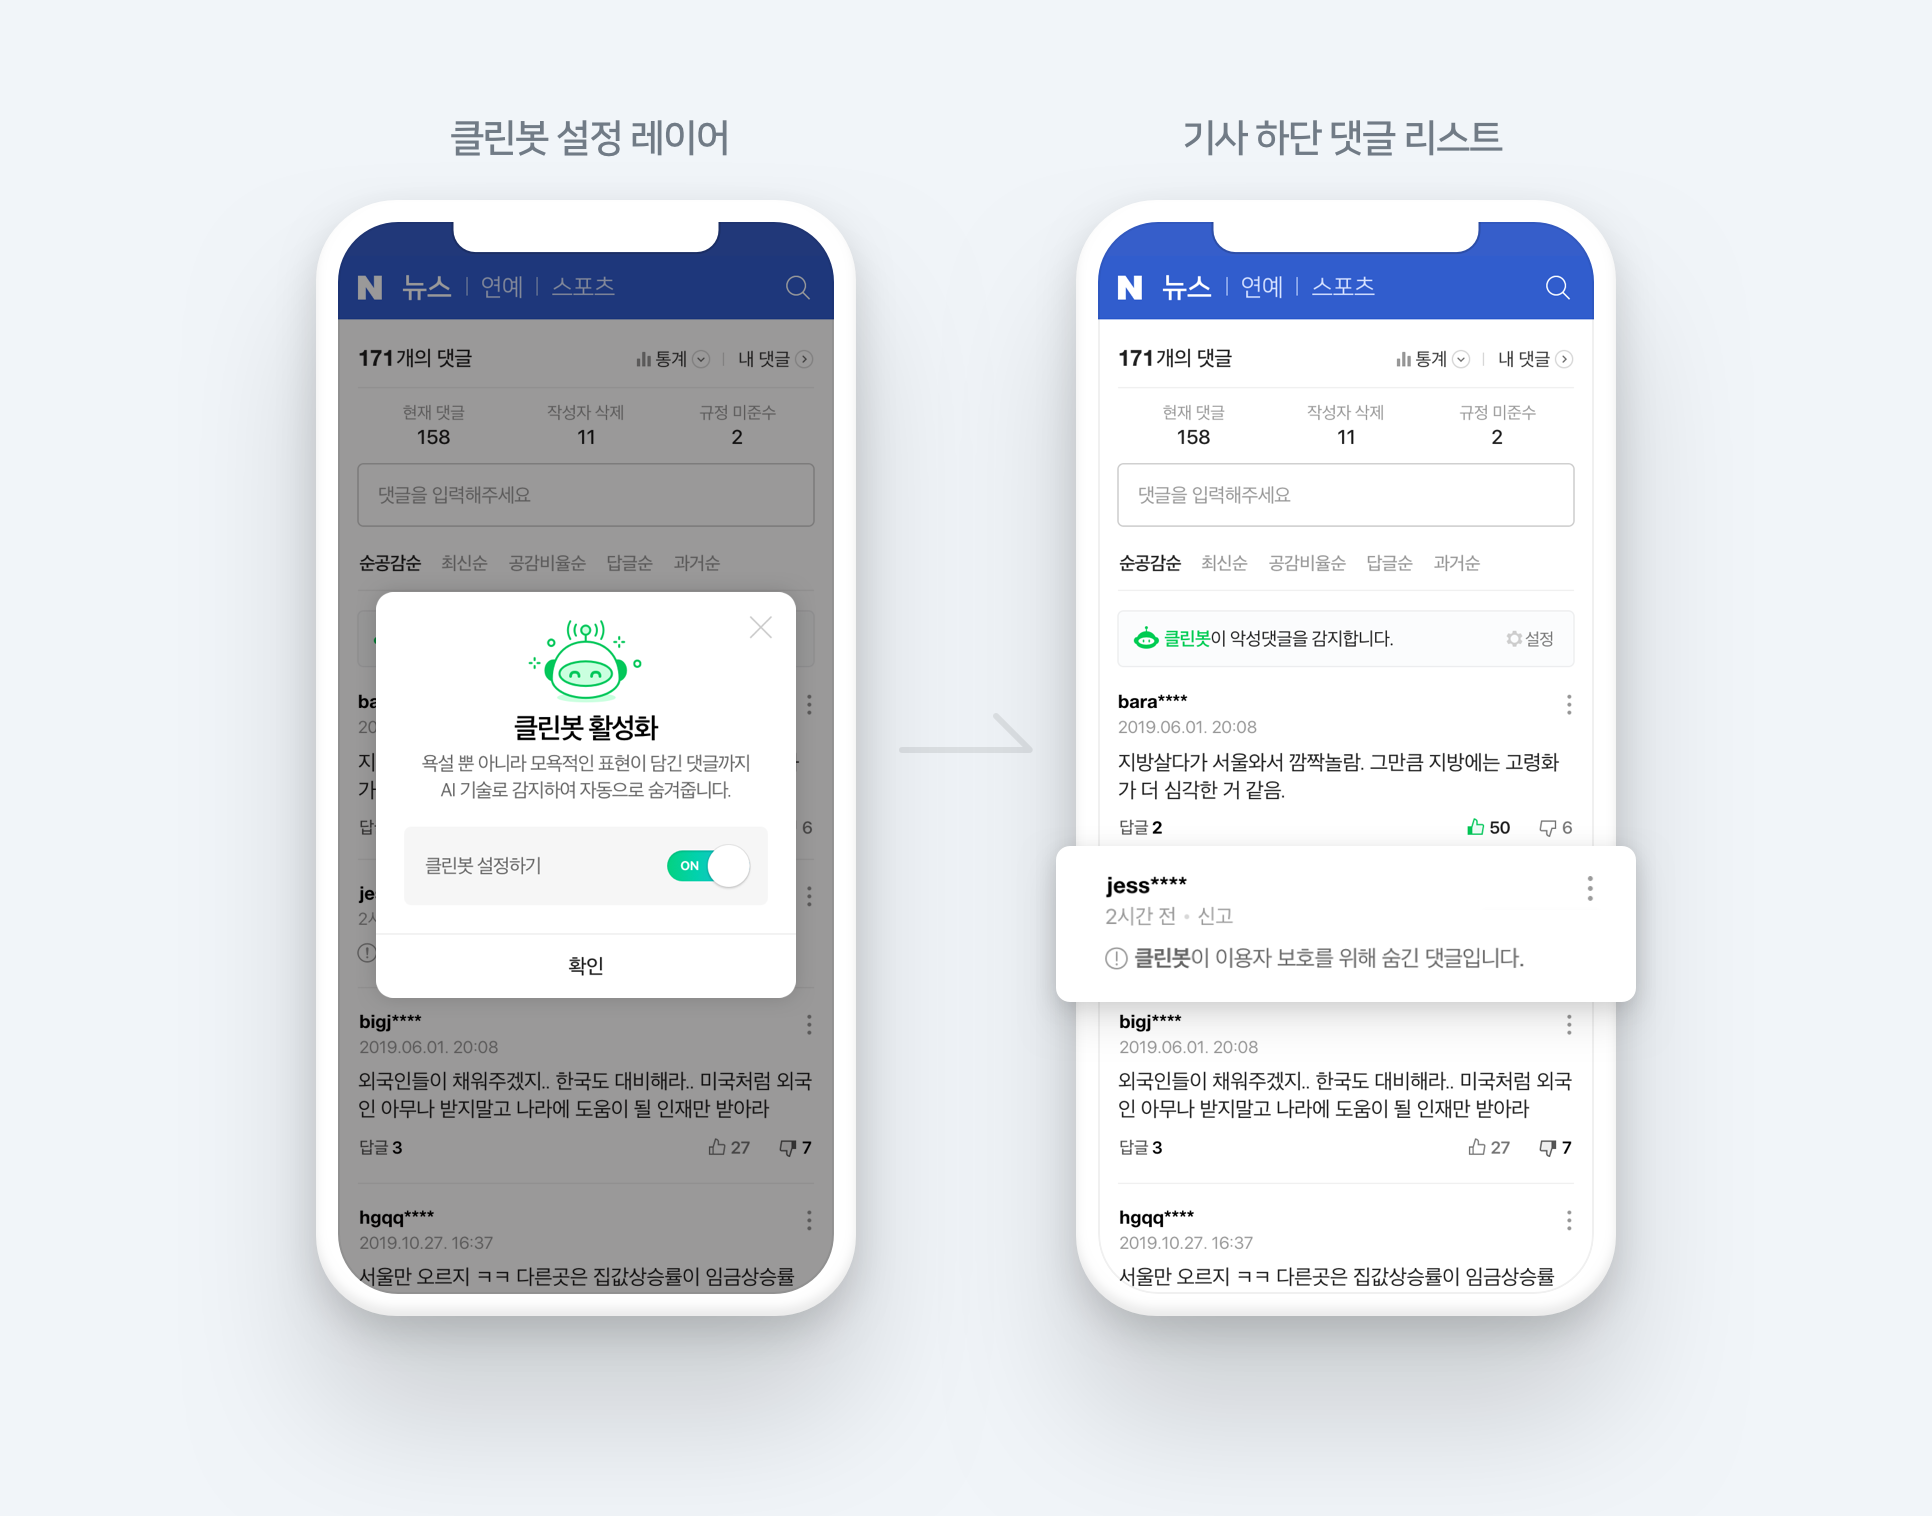 Naver cleanbot